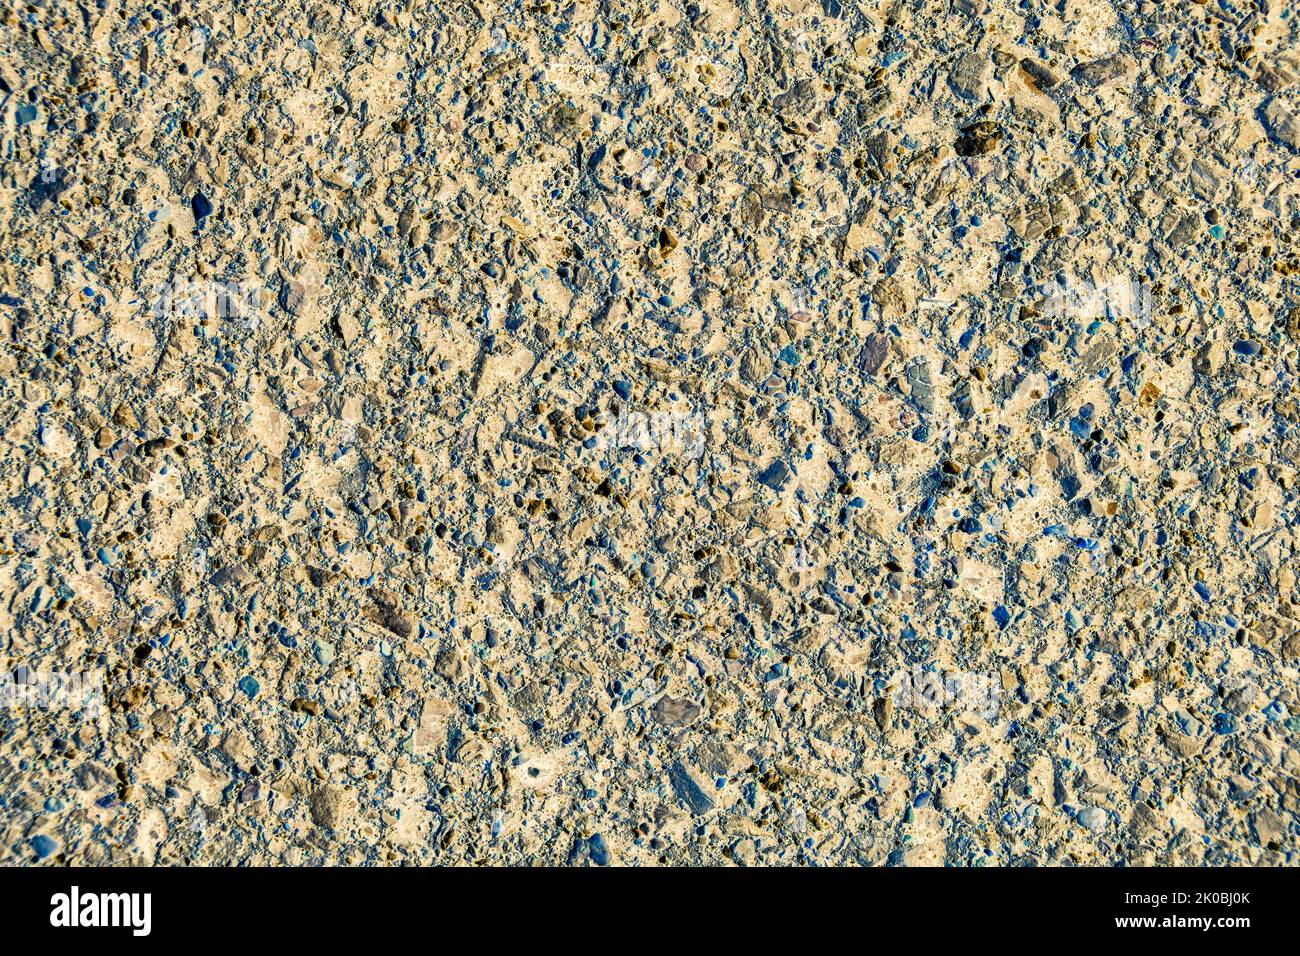 the texture of the old asphalt with a negative effect applied to make it look like a cement-concrete surface, selective focus Stock Photo